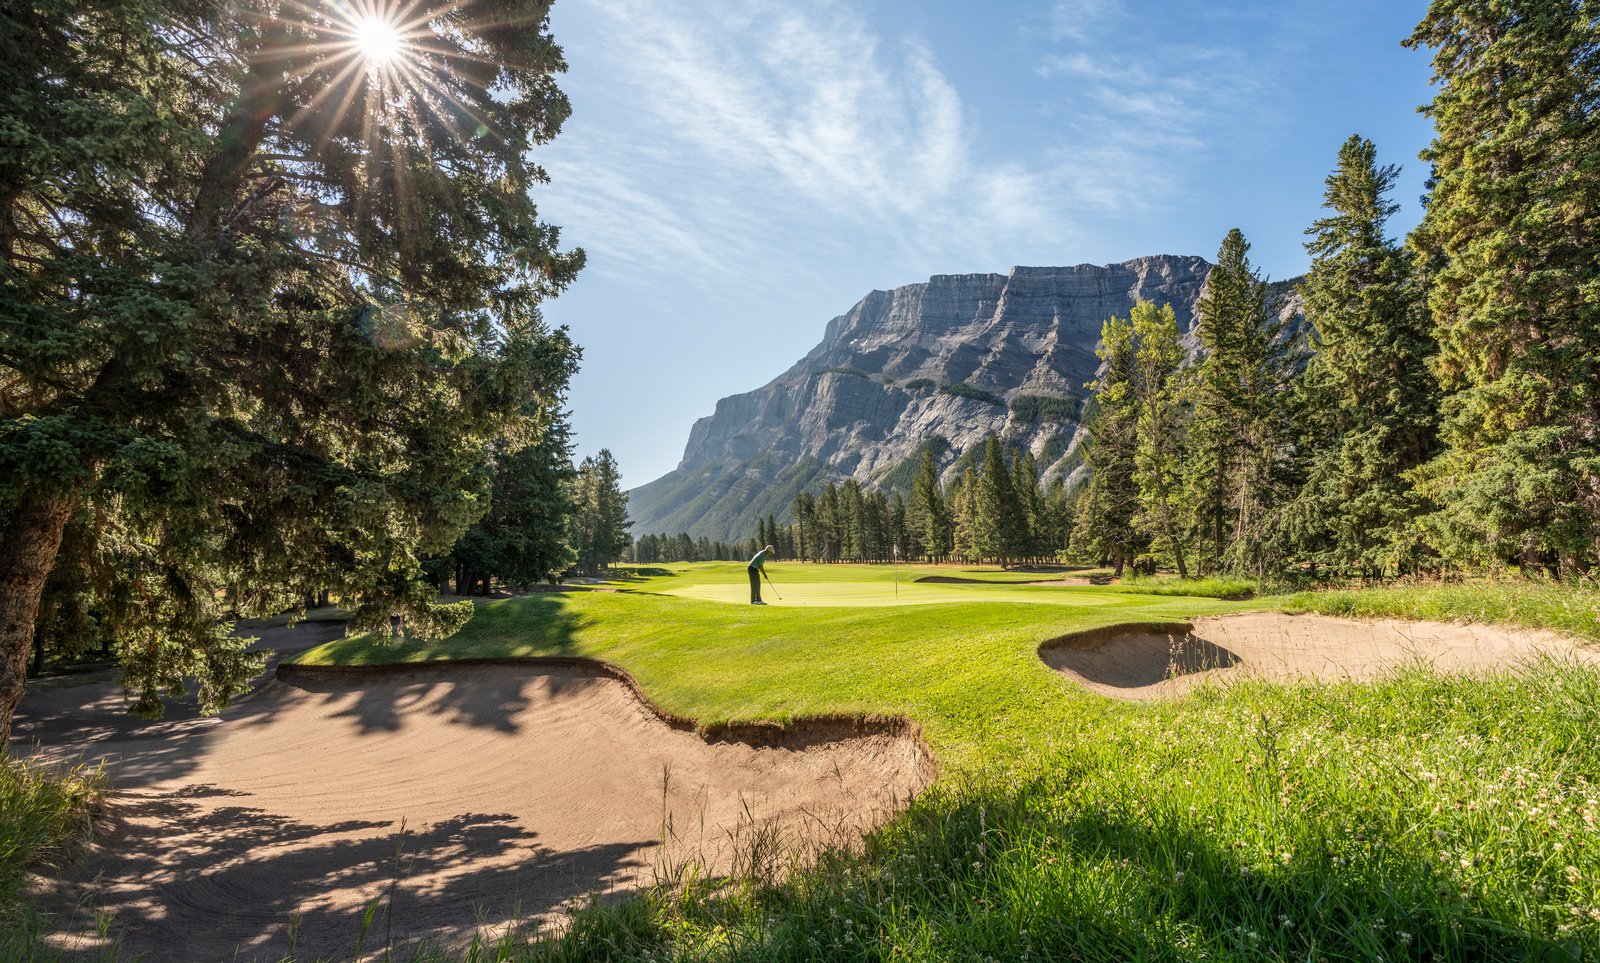 Person golfing at Fairmont Banff Springs Golf Course.